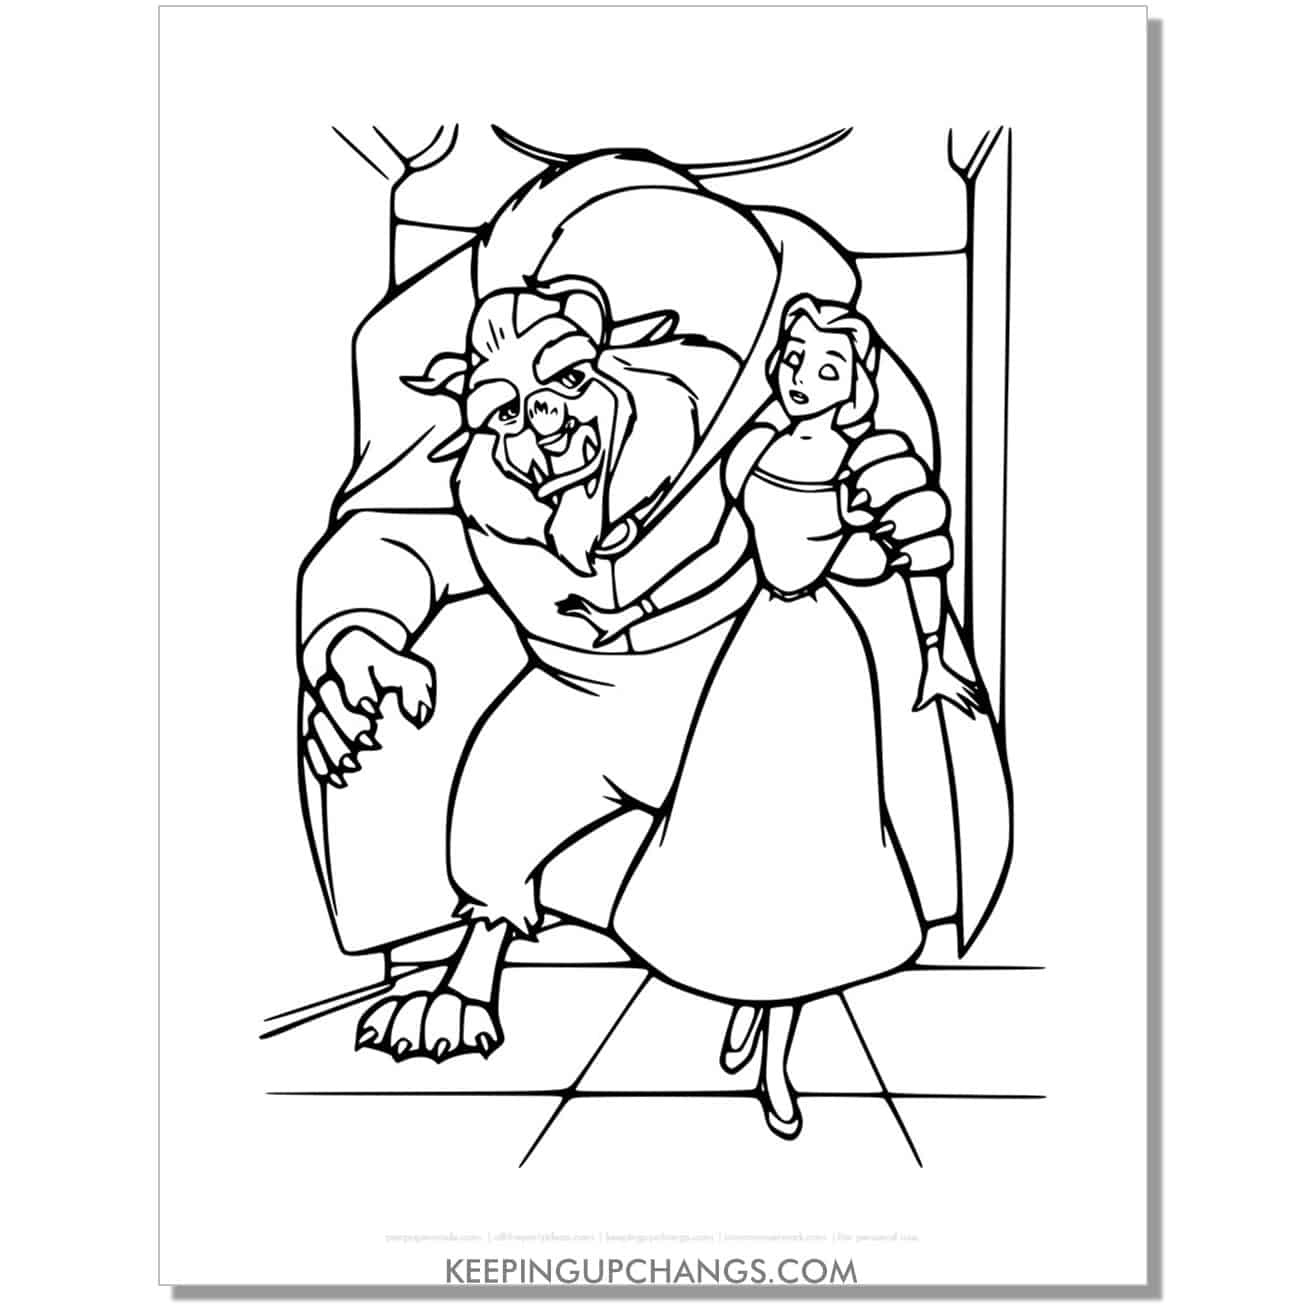 beauty and beast has surprise for belle coloring page, sheet.